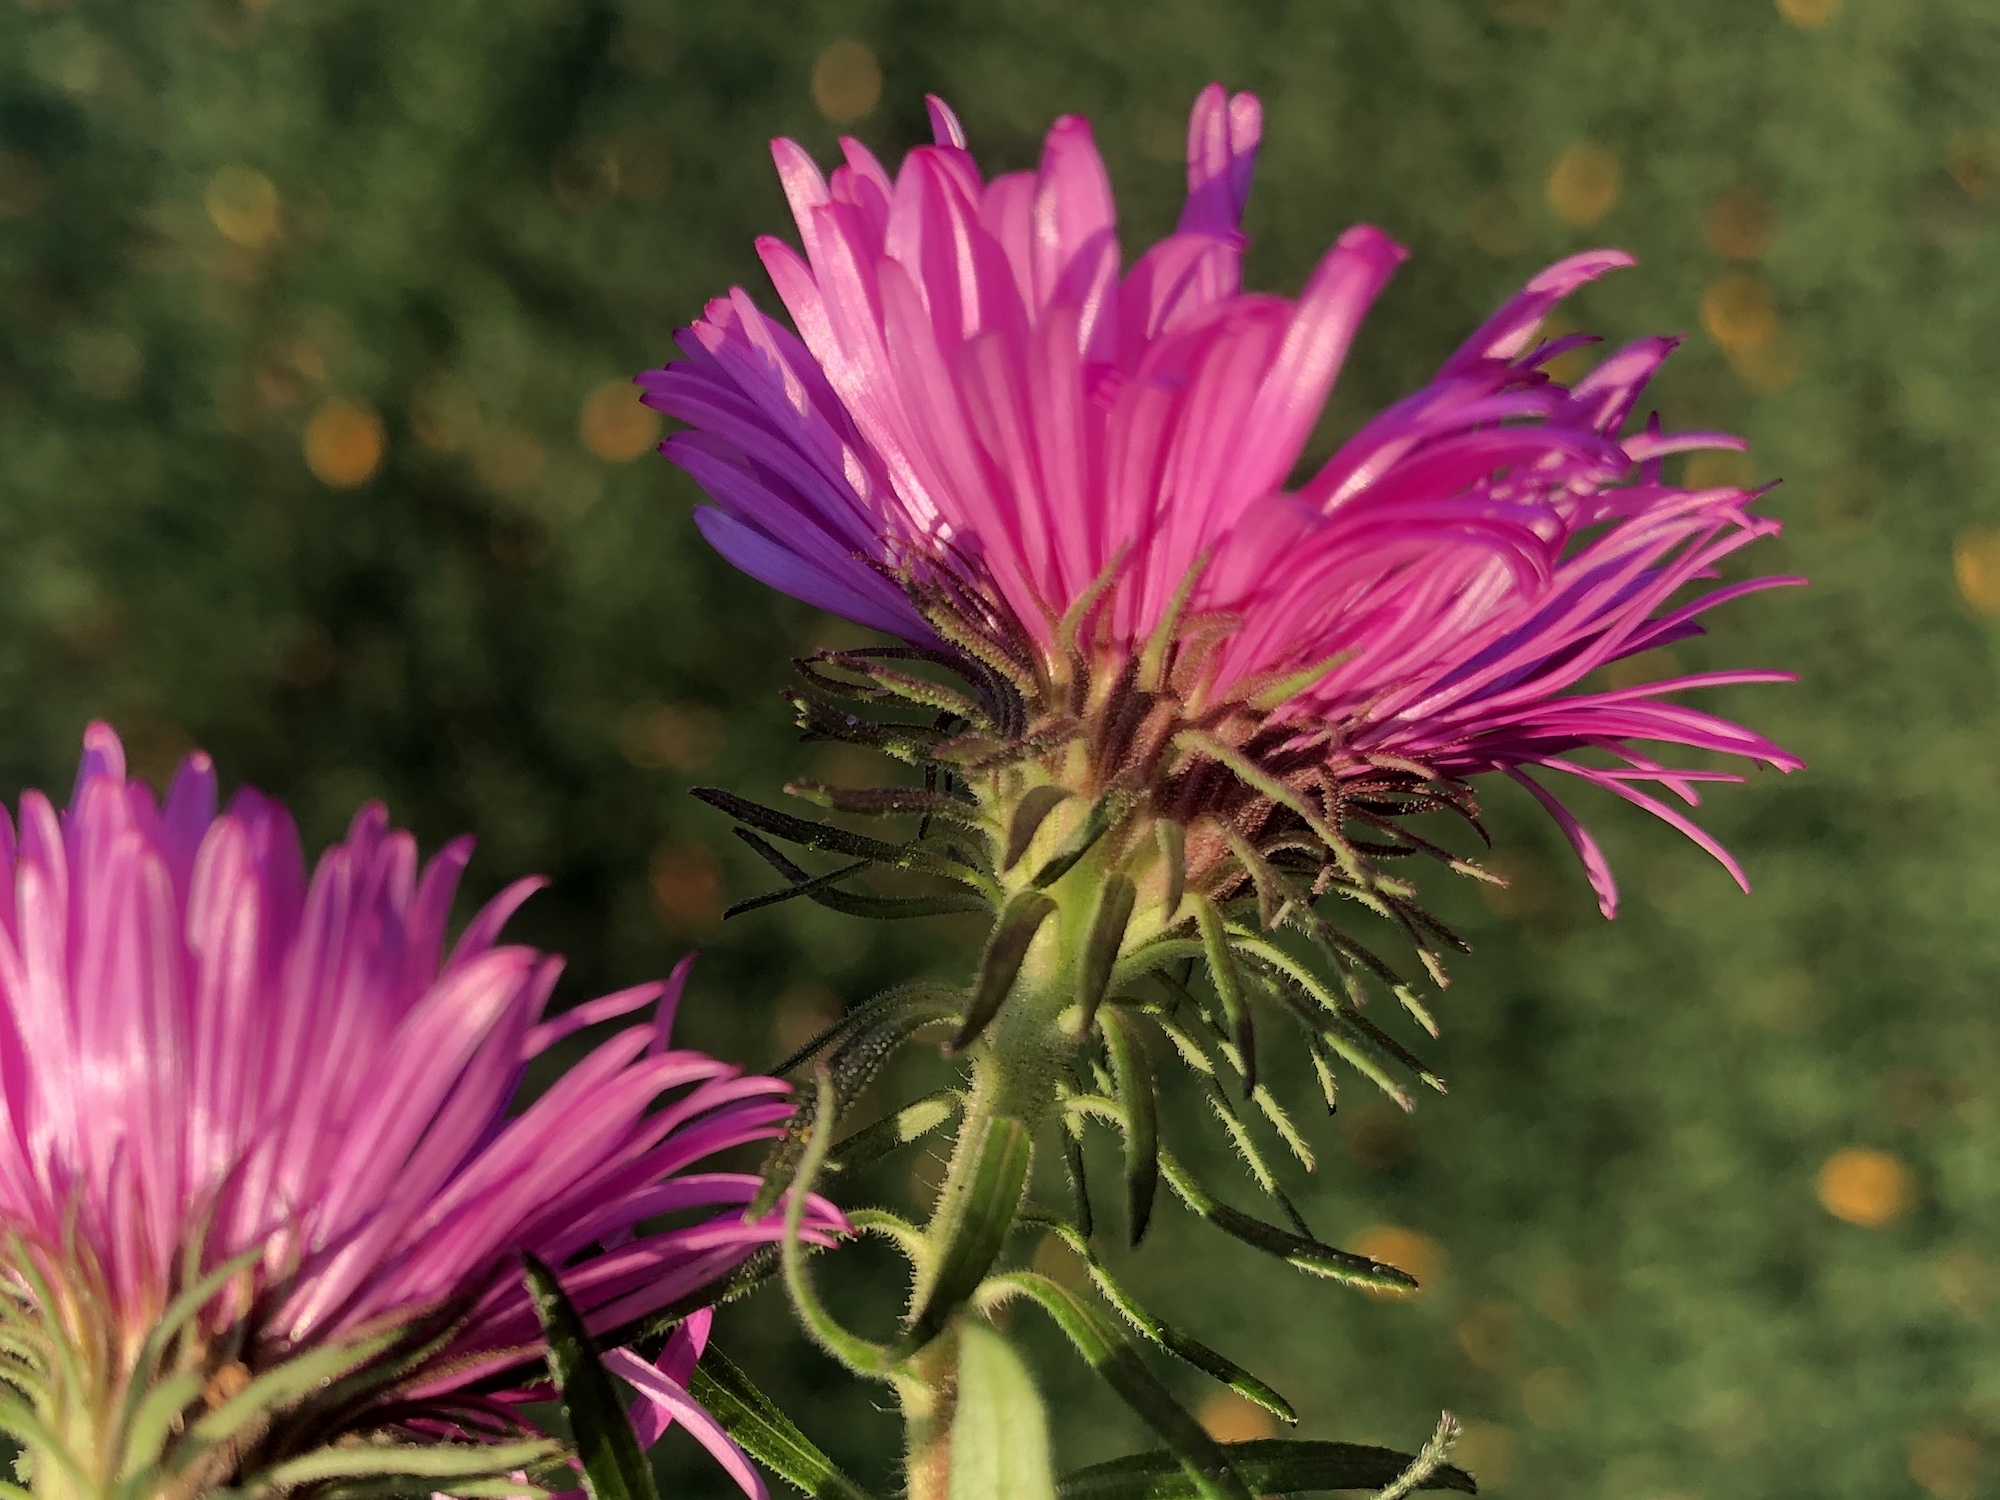 The narrow bracts of New England Aster are in multiple layers and typically green with a tinge of purple.